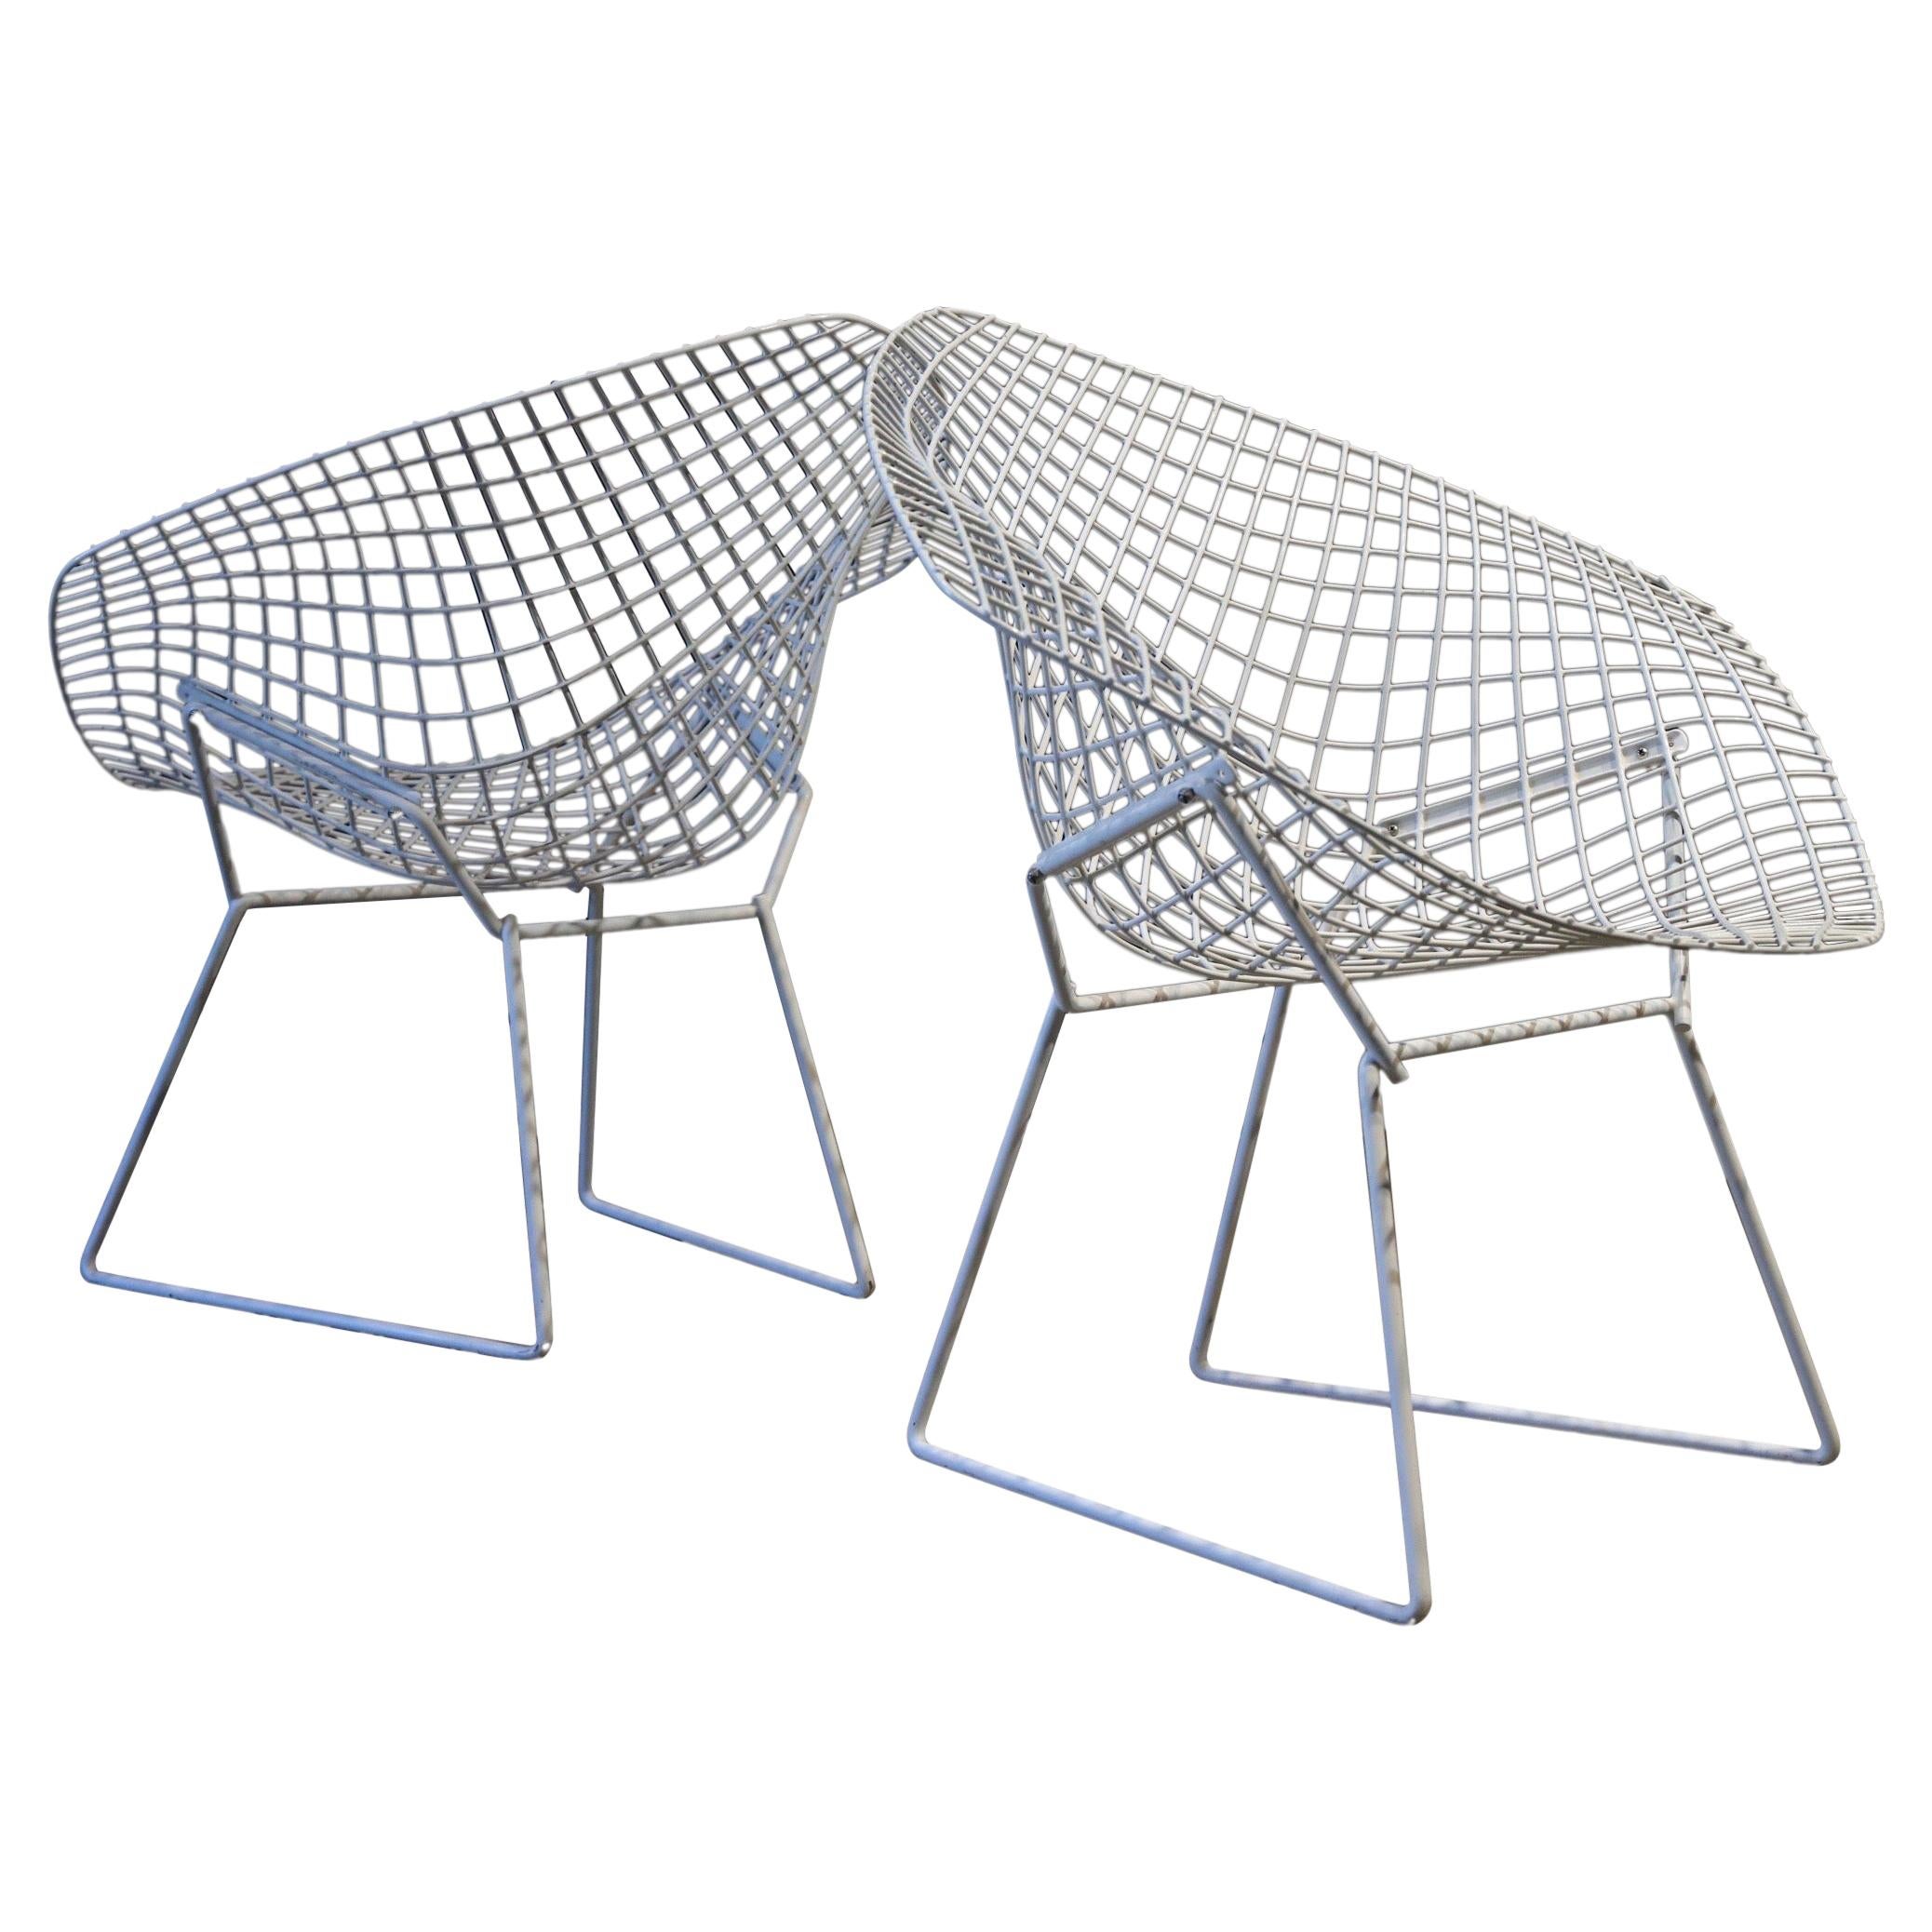 Pair of Diamond Chairs by Harry Bertoia for Knoll